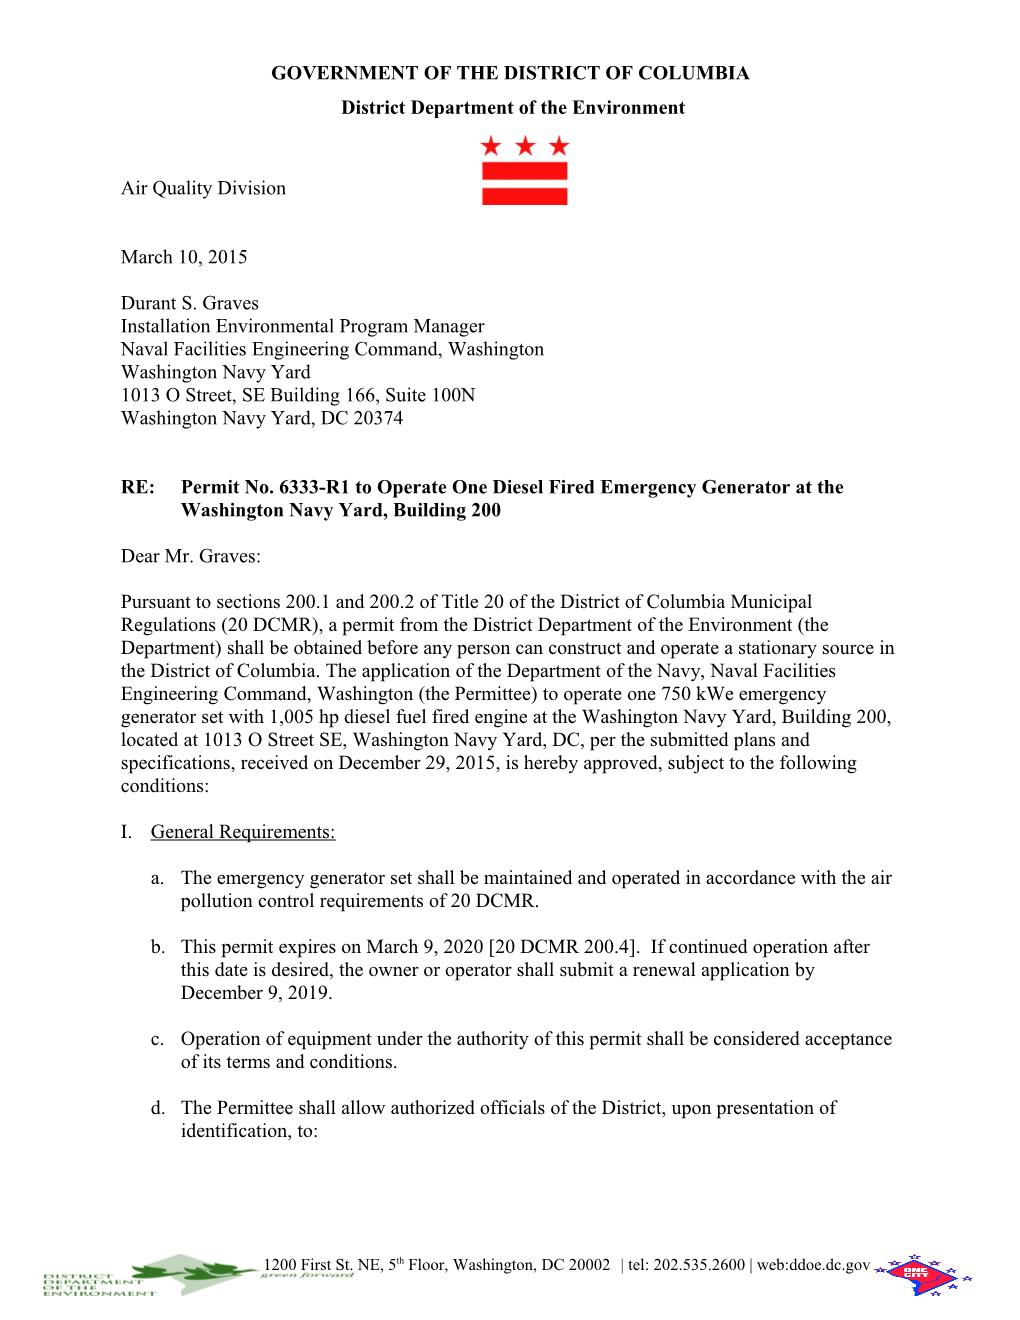 Permit No. 6333-R1 to Operate One Emergency Generator